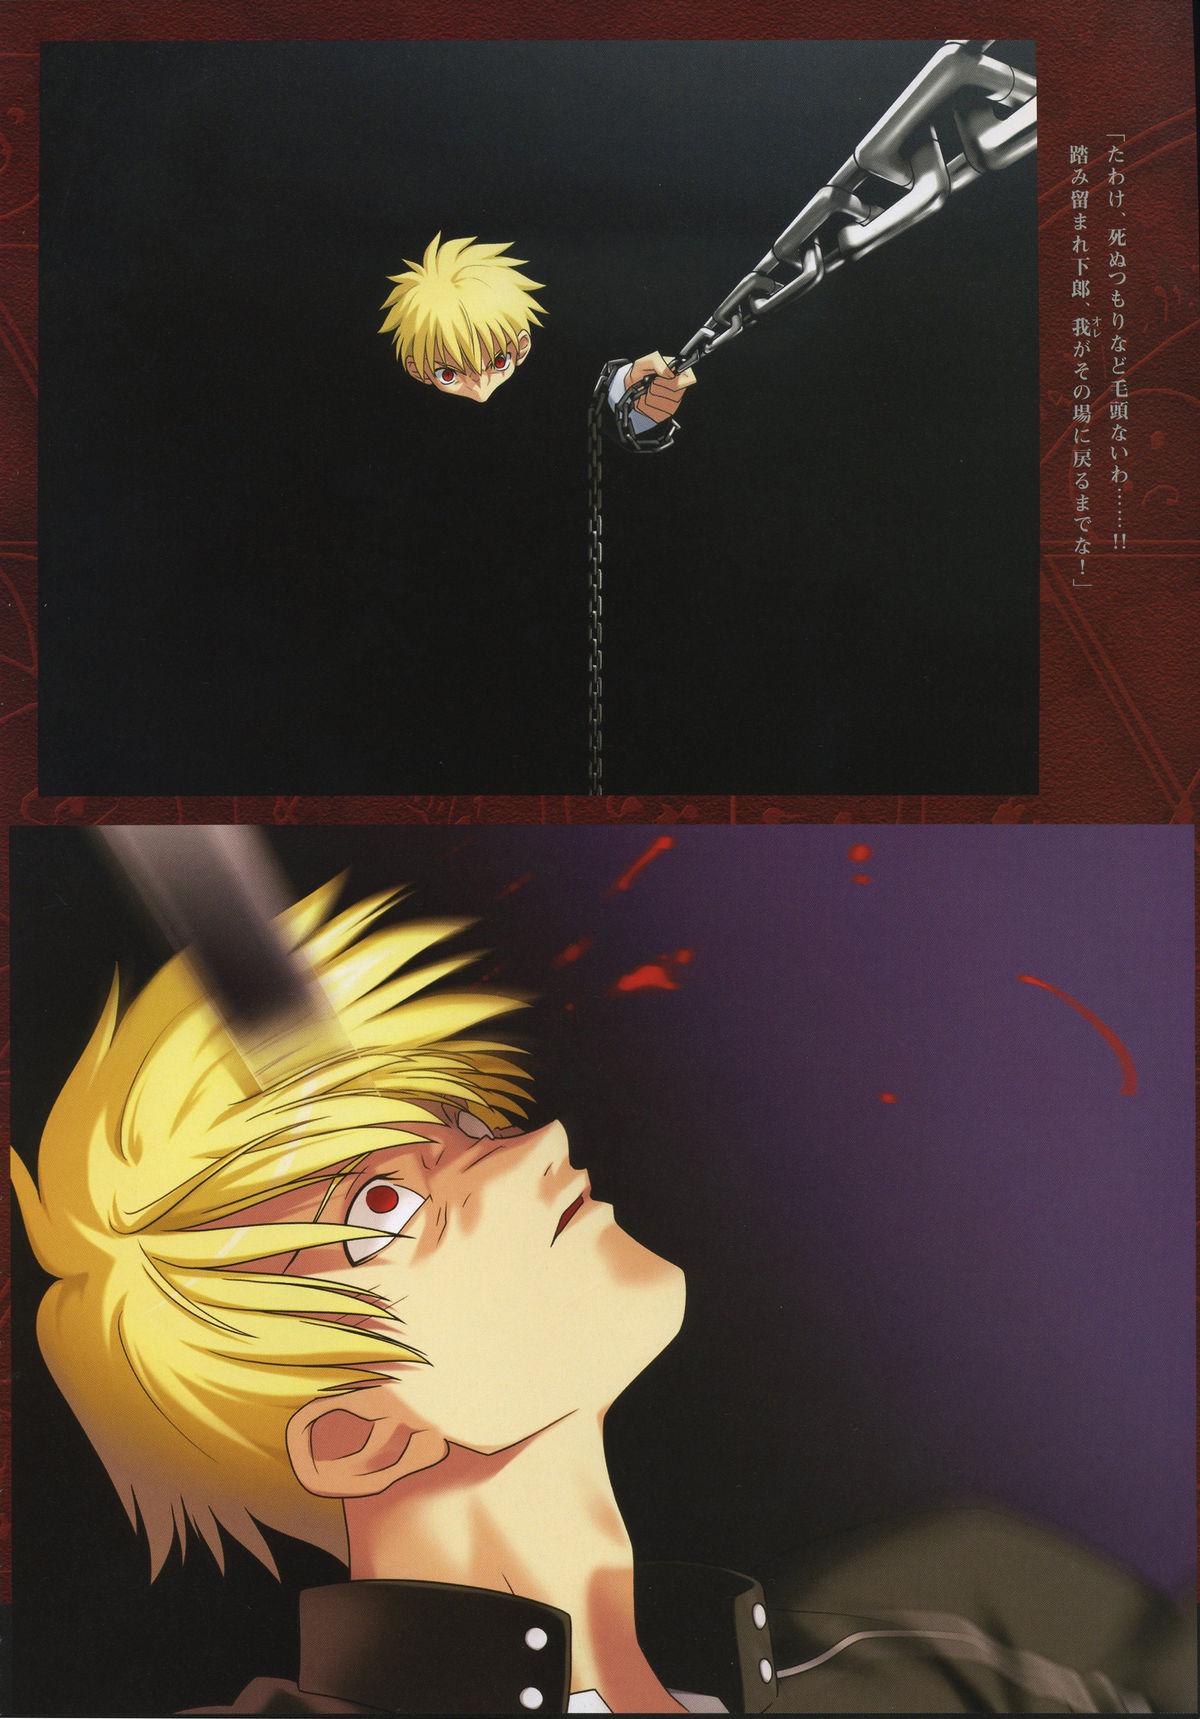 Fate/complete material I - Art material. 73